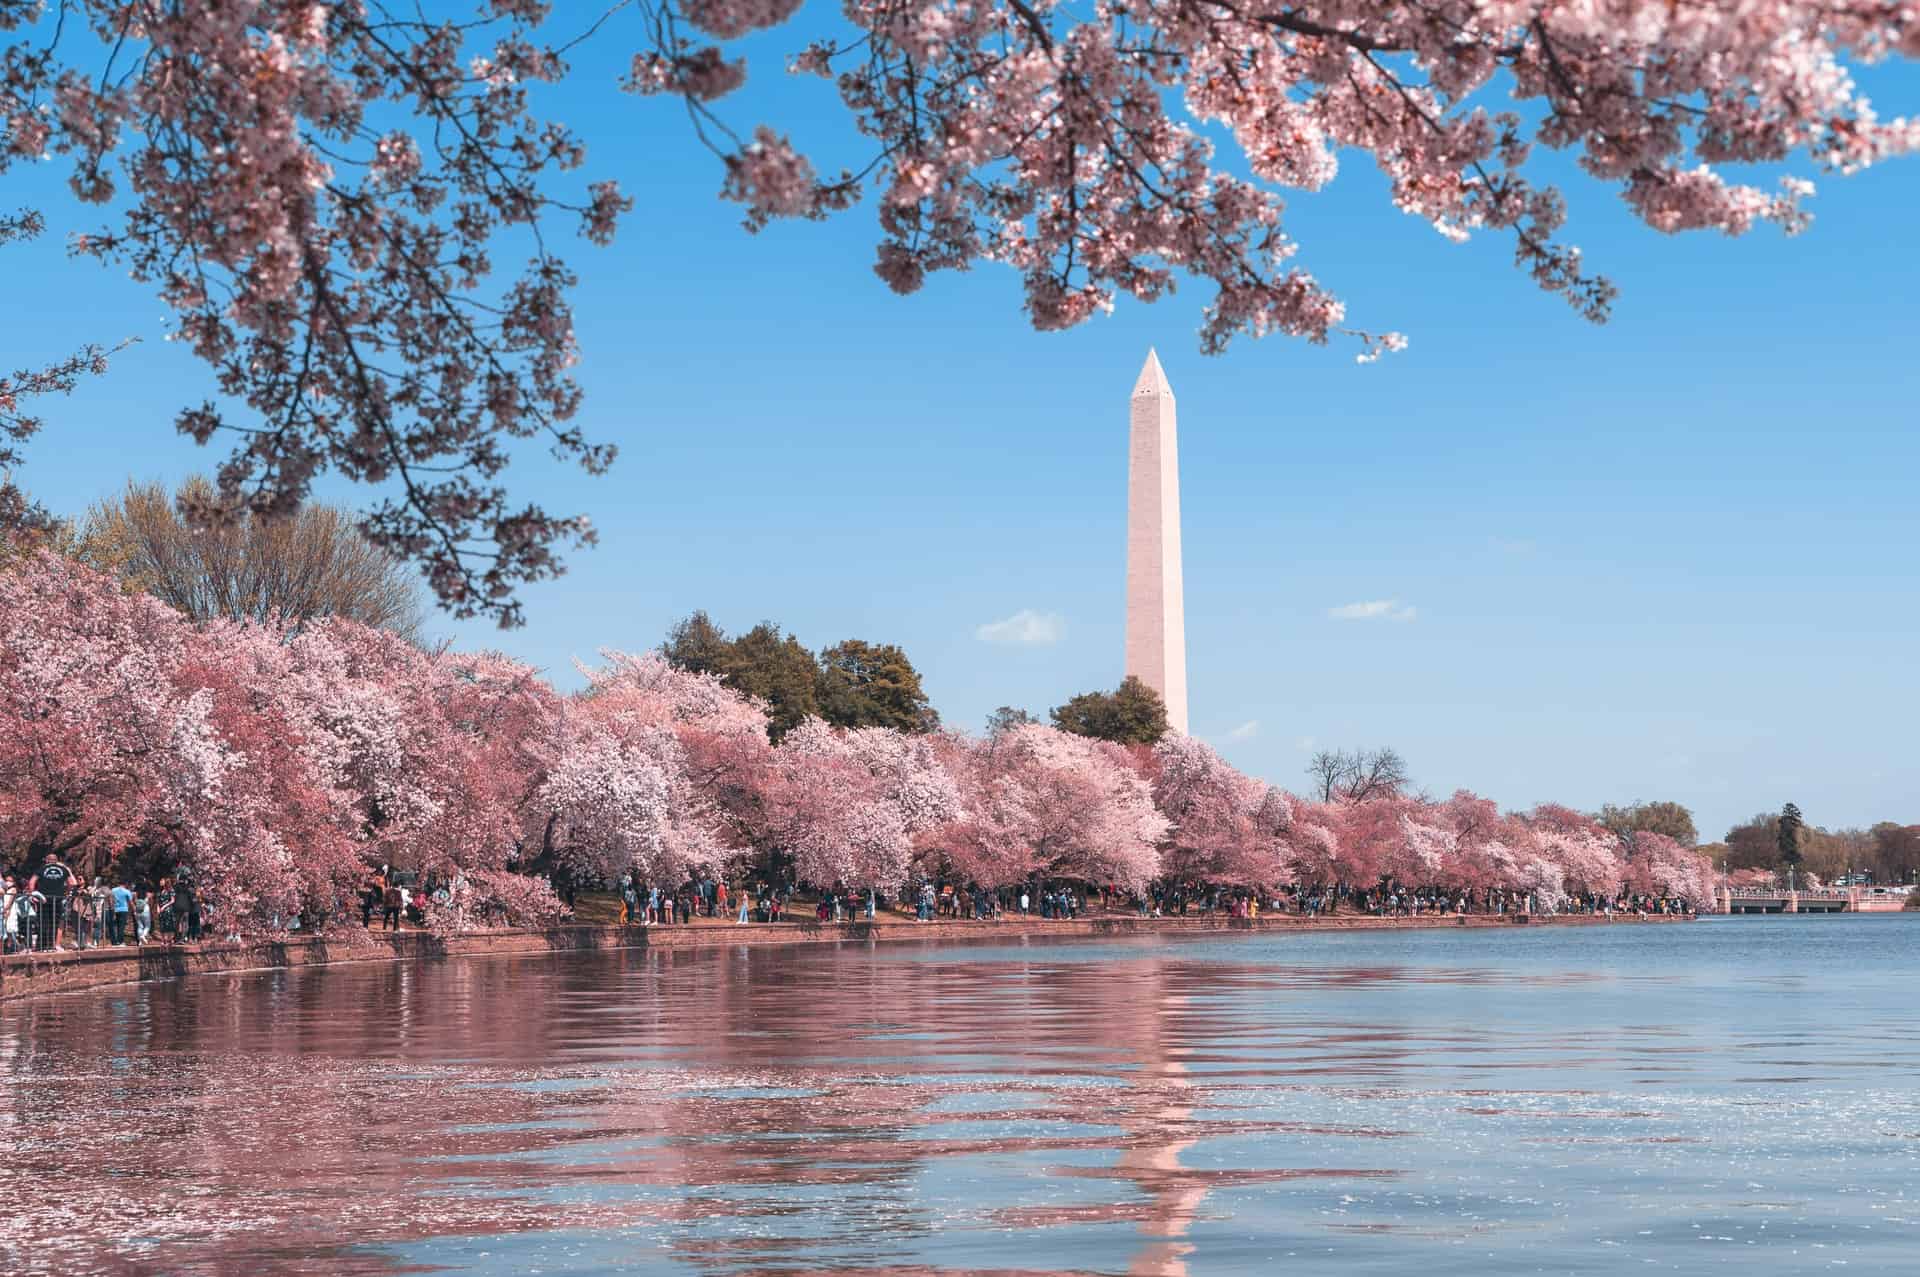 Best things to do in Washington DC - Mike Ferraco - Washington Monument view over the Tidal Basin by Andy He on Unsplash